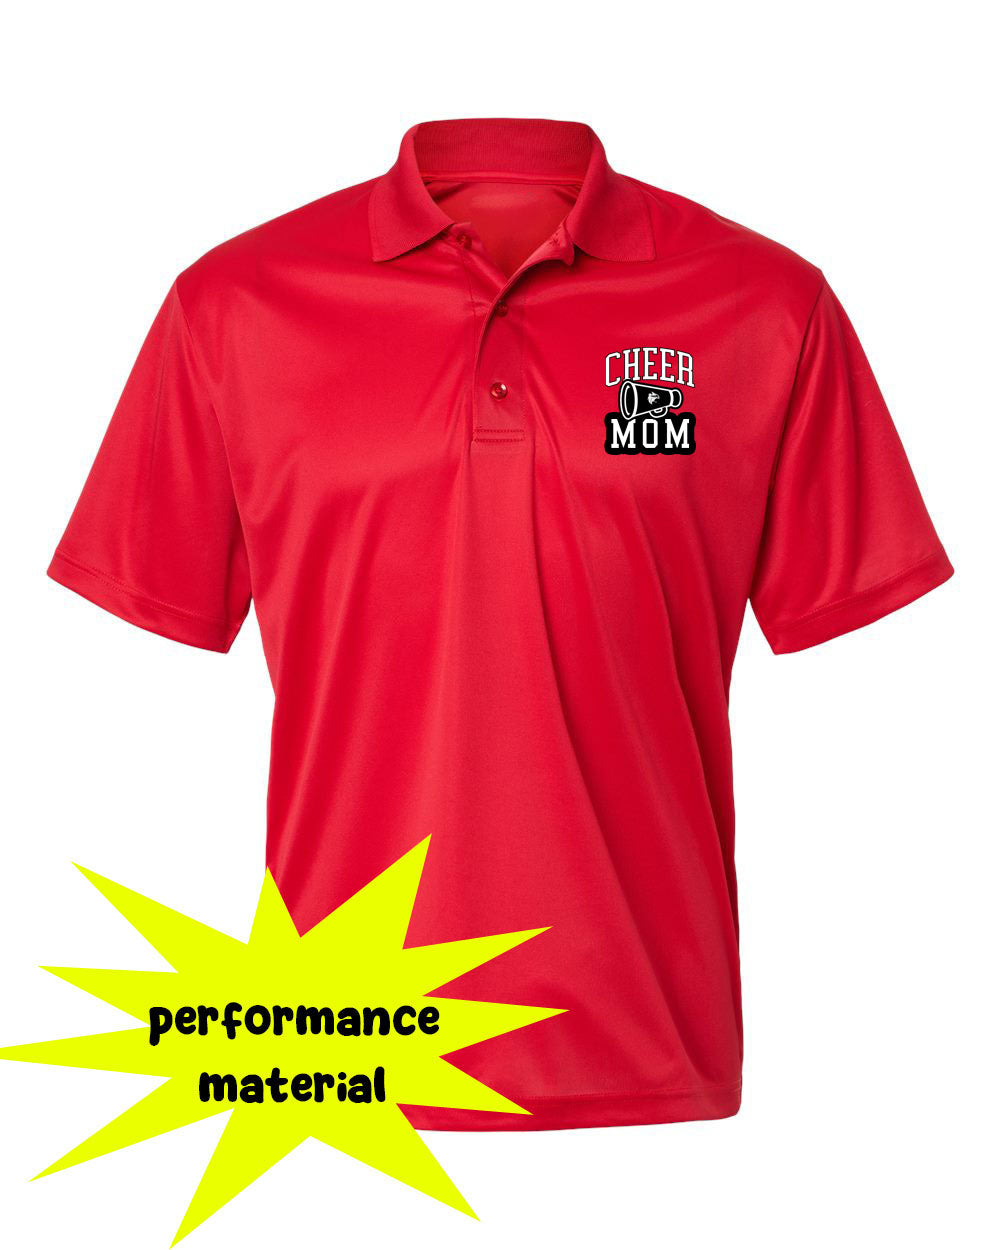 High Point Cheer Design 7 Performance Material Polo T-Shirt